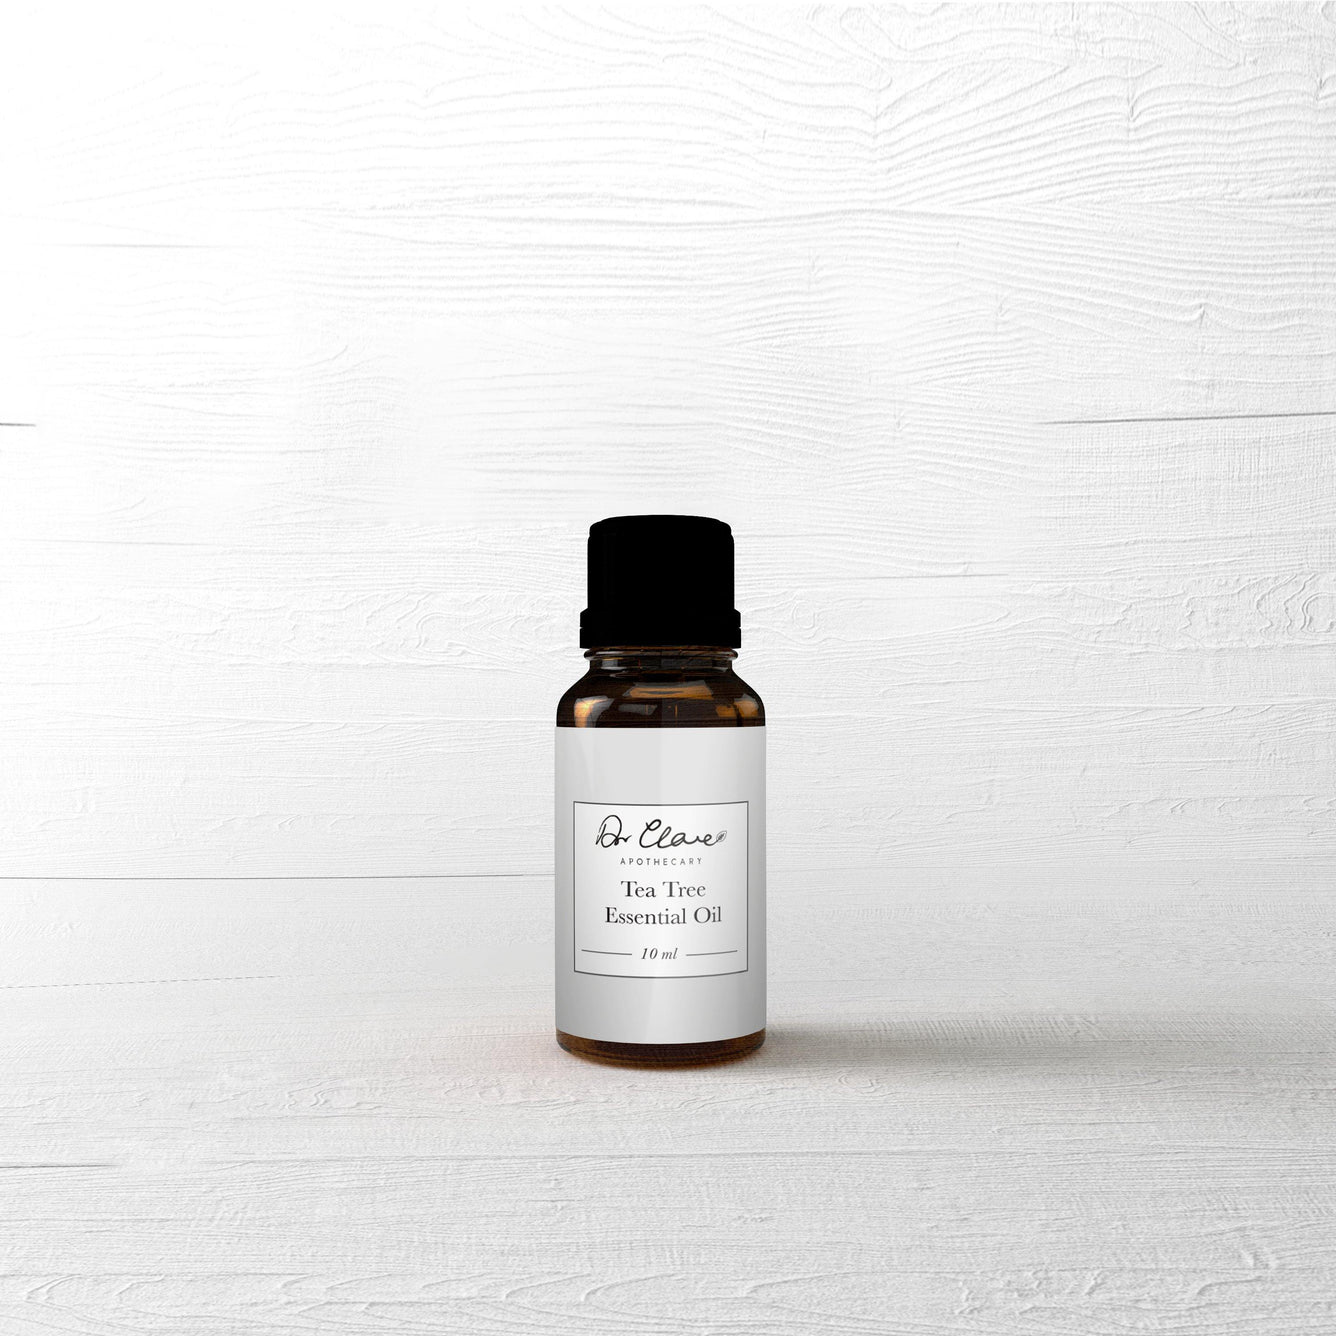 Tea Tree Essential Oil 10 ml - DrClareApothecary